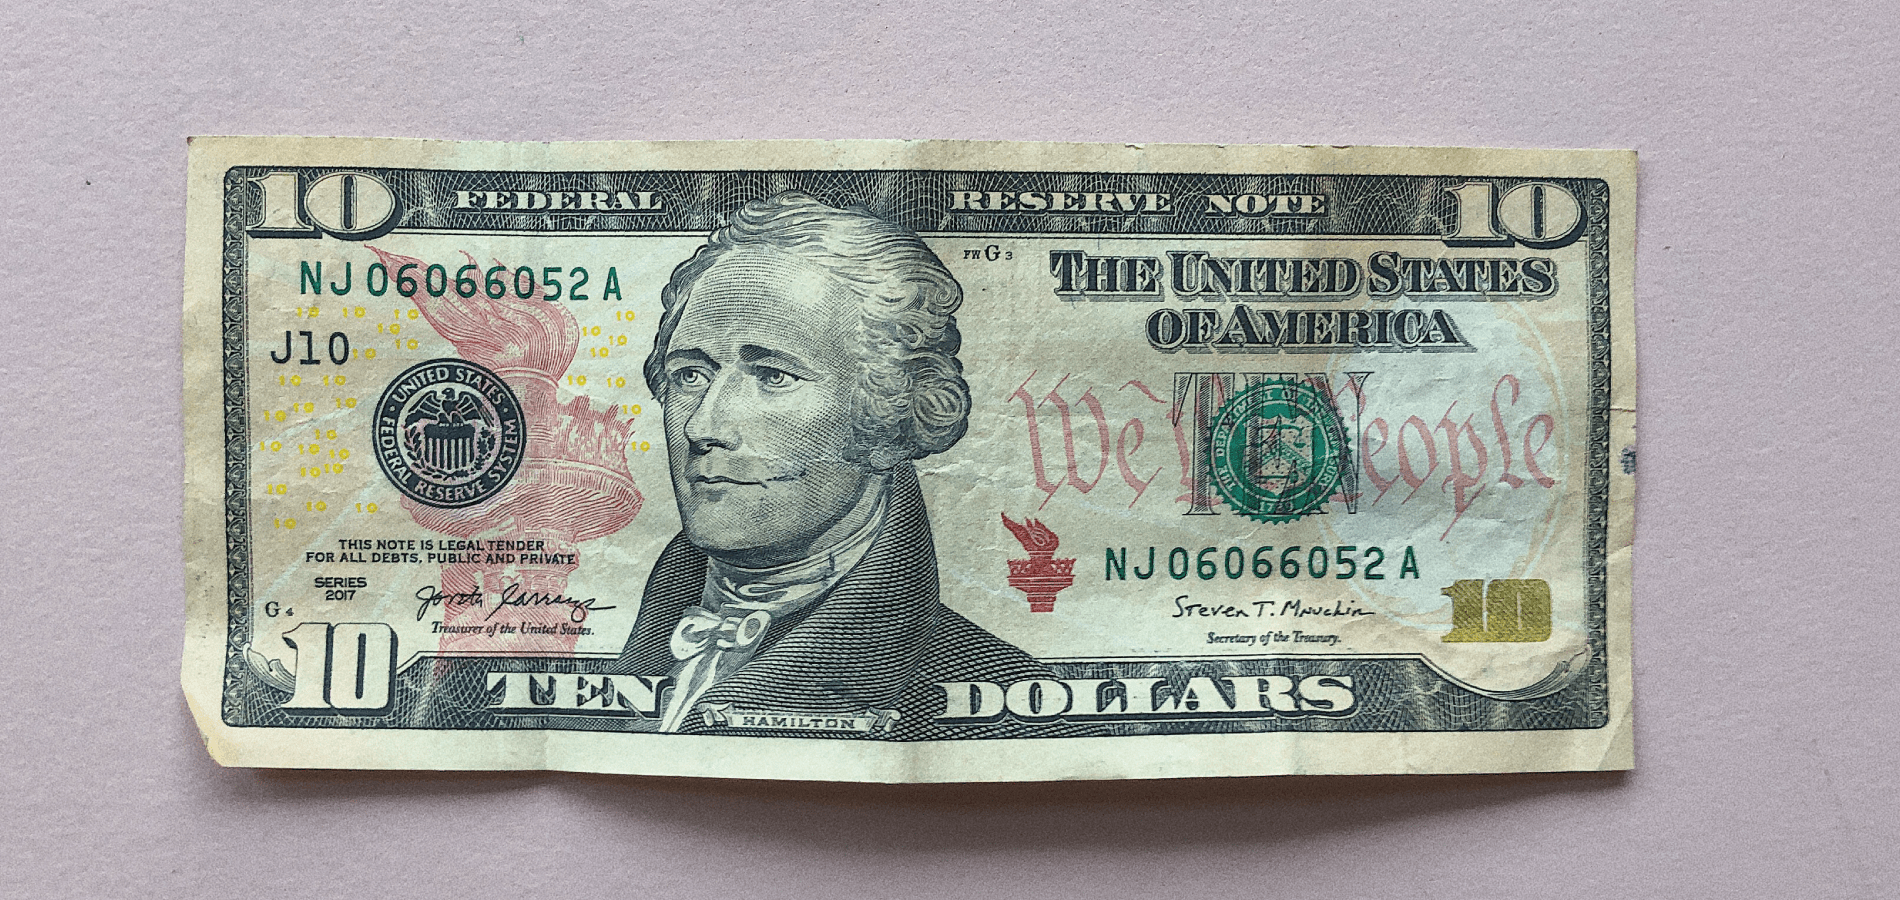 Picture of the U.S. $10 Bill